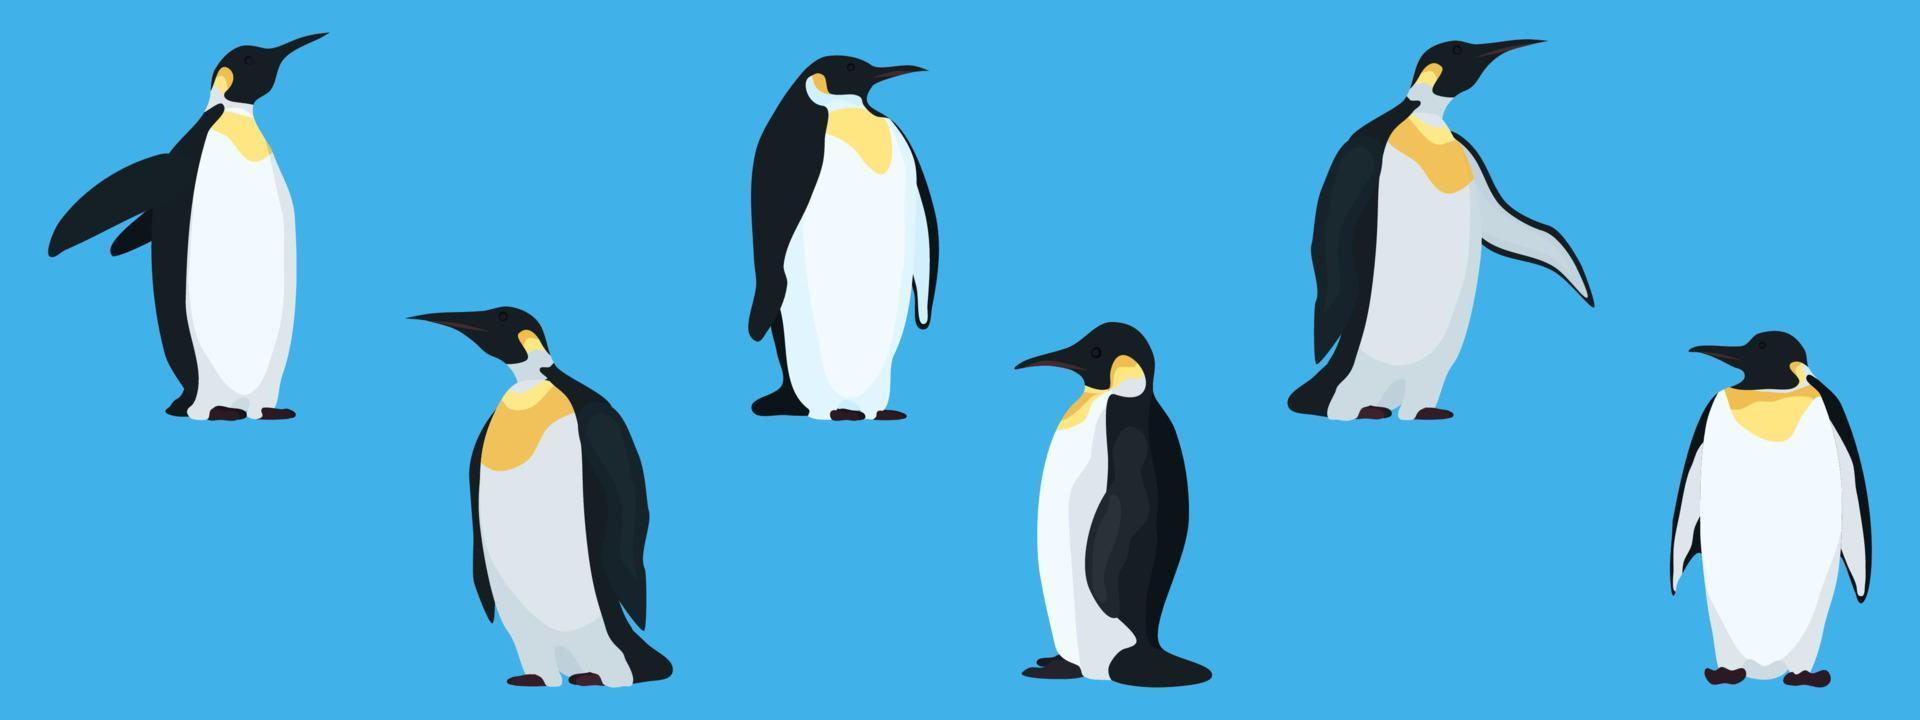 flat penguins on a blue background collection vector